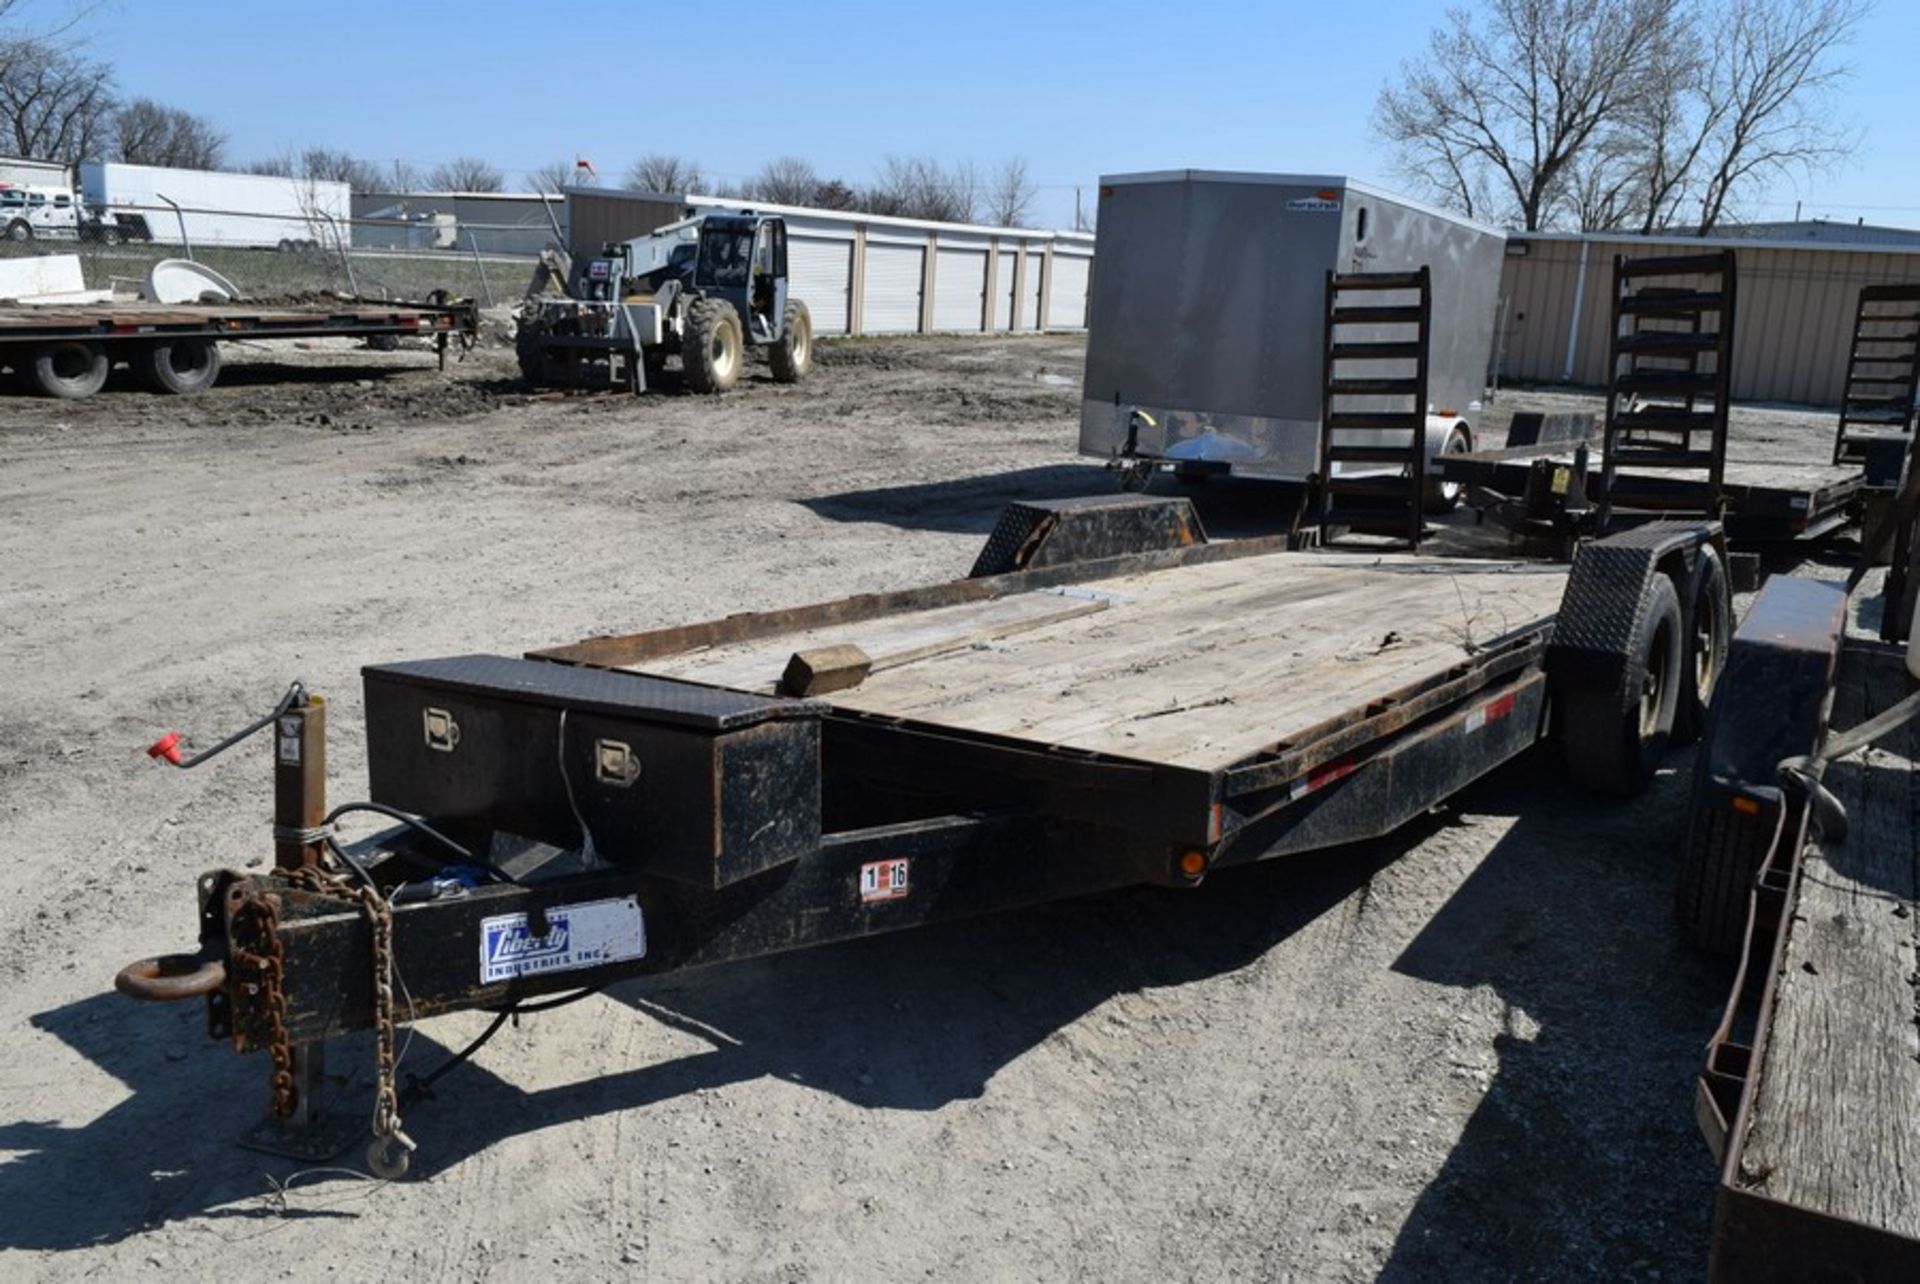 LIBERTY 18' T/A EQUIPMENT TRAILER VIN: 5M4LP18258F005803 (2008) 18' BED, MISSING WHEELS FROM - Image 2 of 4